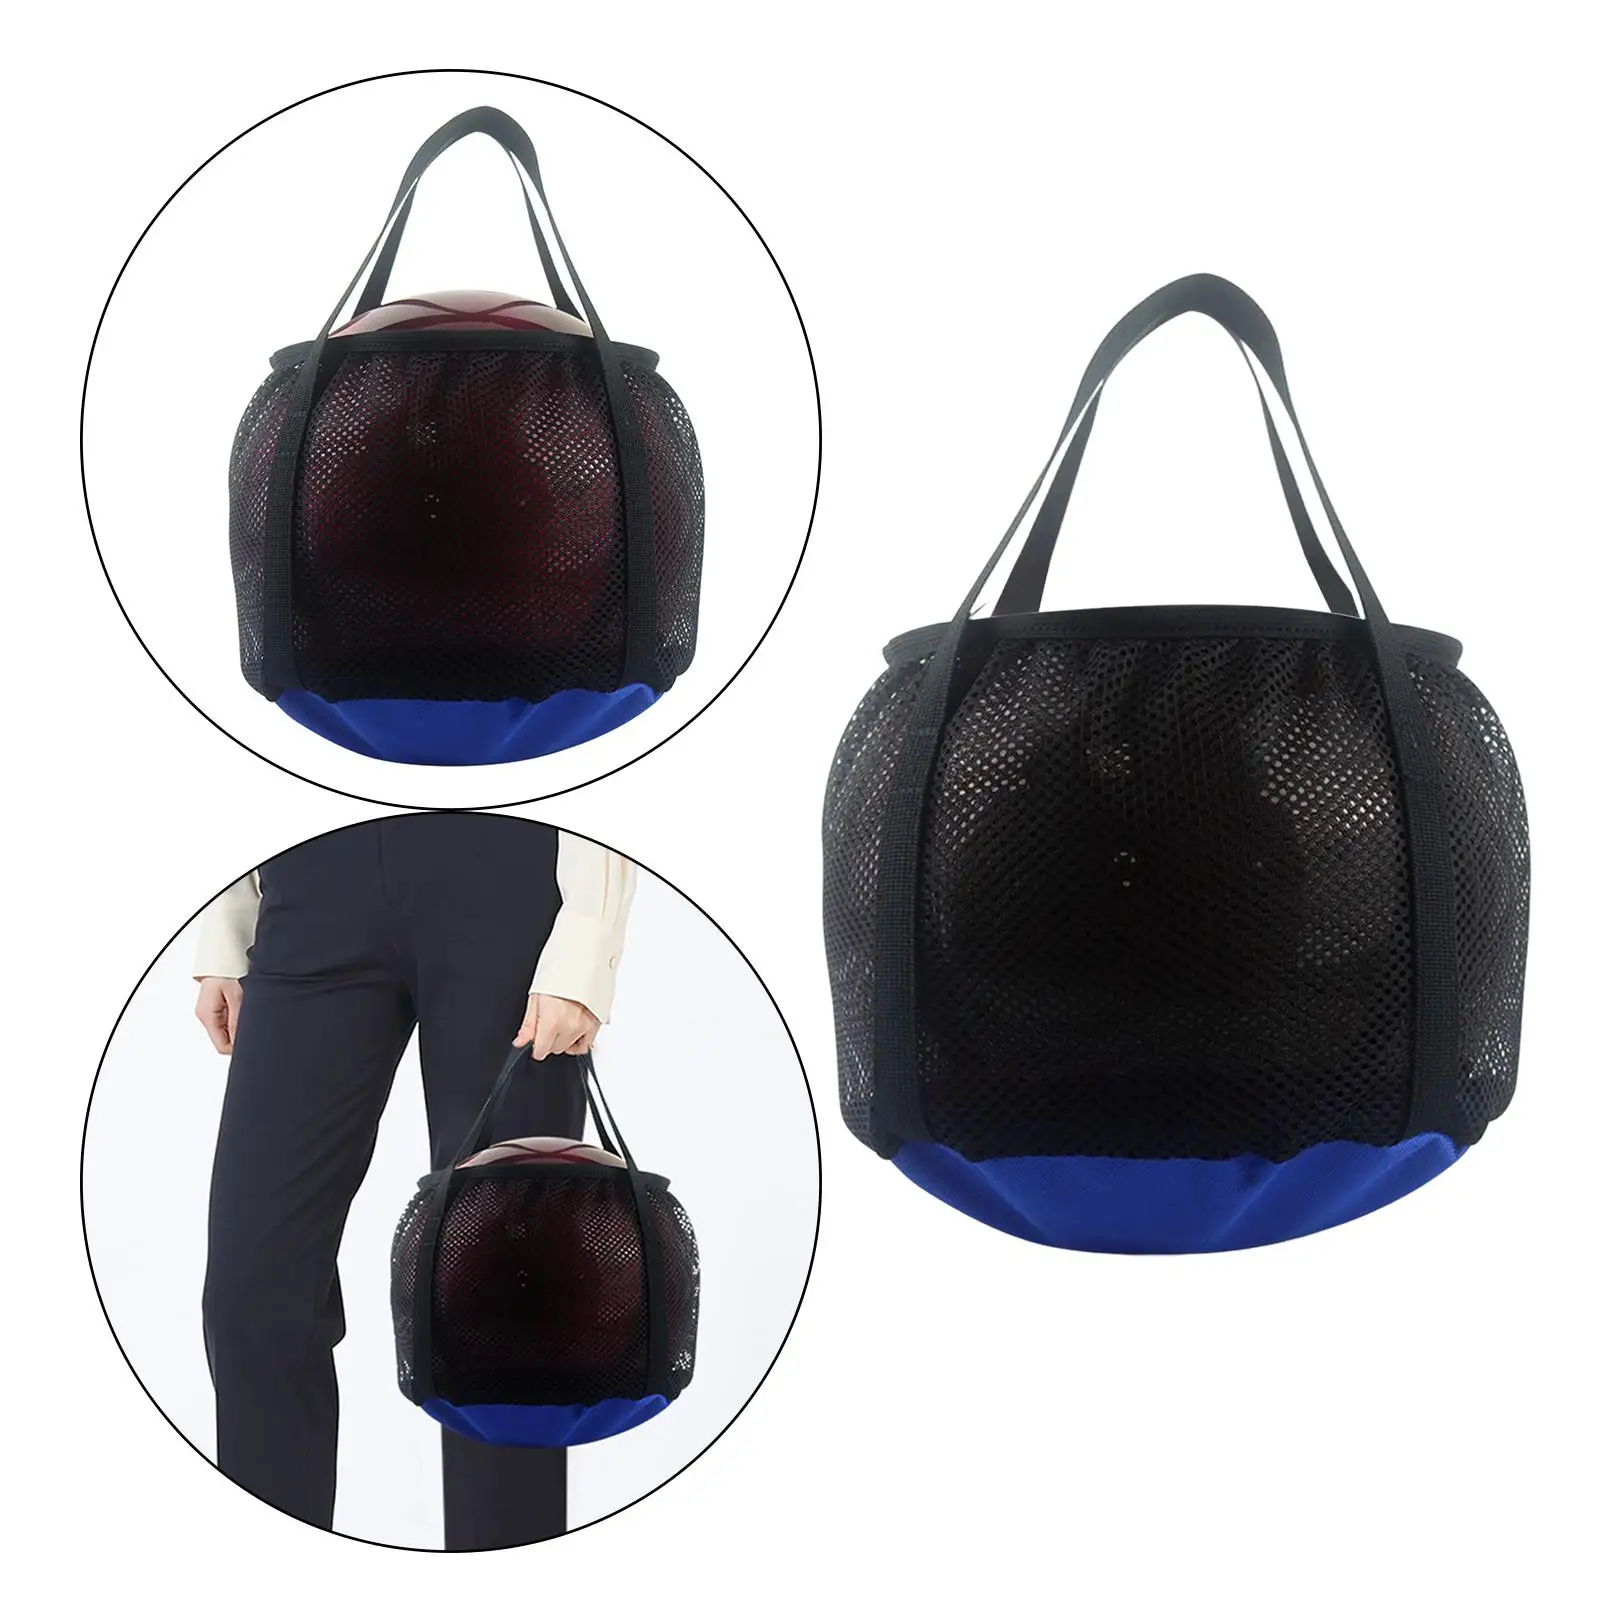 Oxford Bowling Ball Bags Handbag Sport Equipment with Handle Pocket Tote Portable for Gym Outdoor Single Ball Practice Training